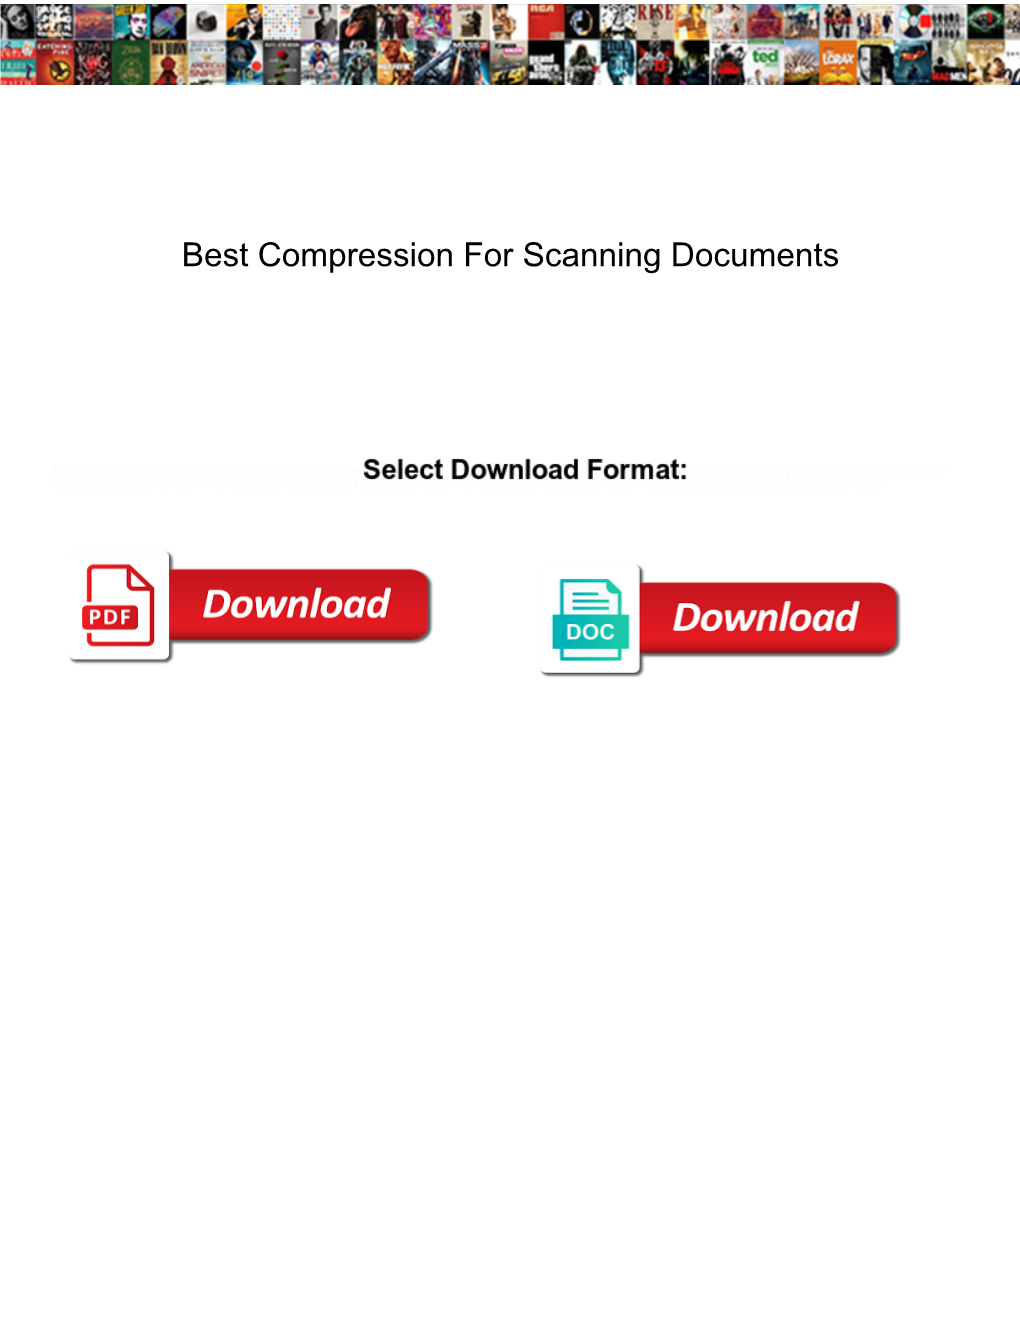 Best Compression for Scanning Documents